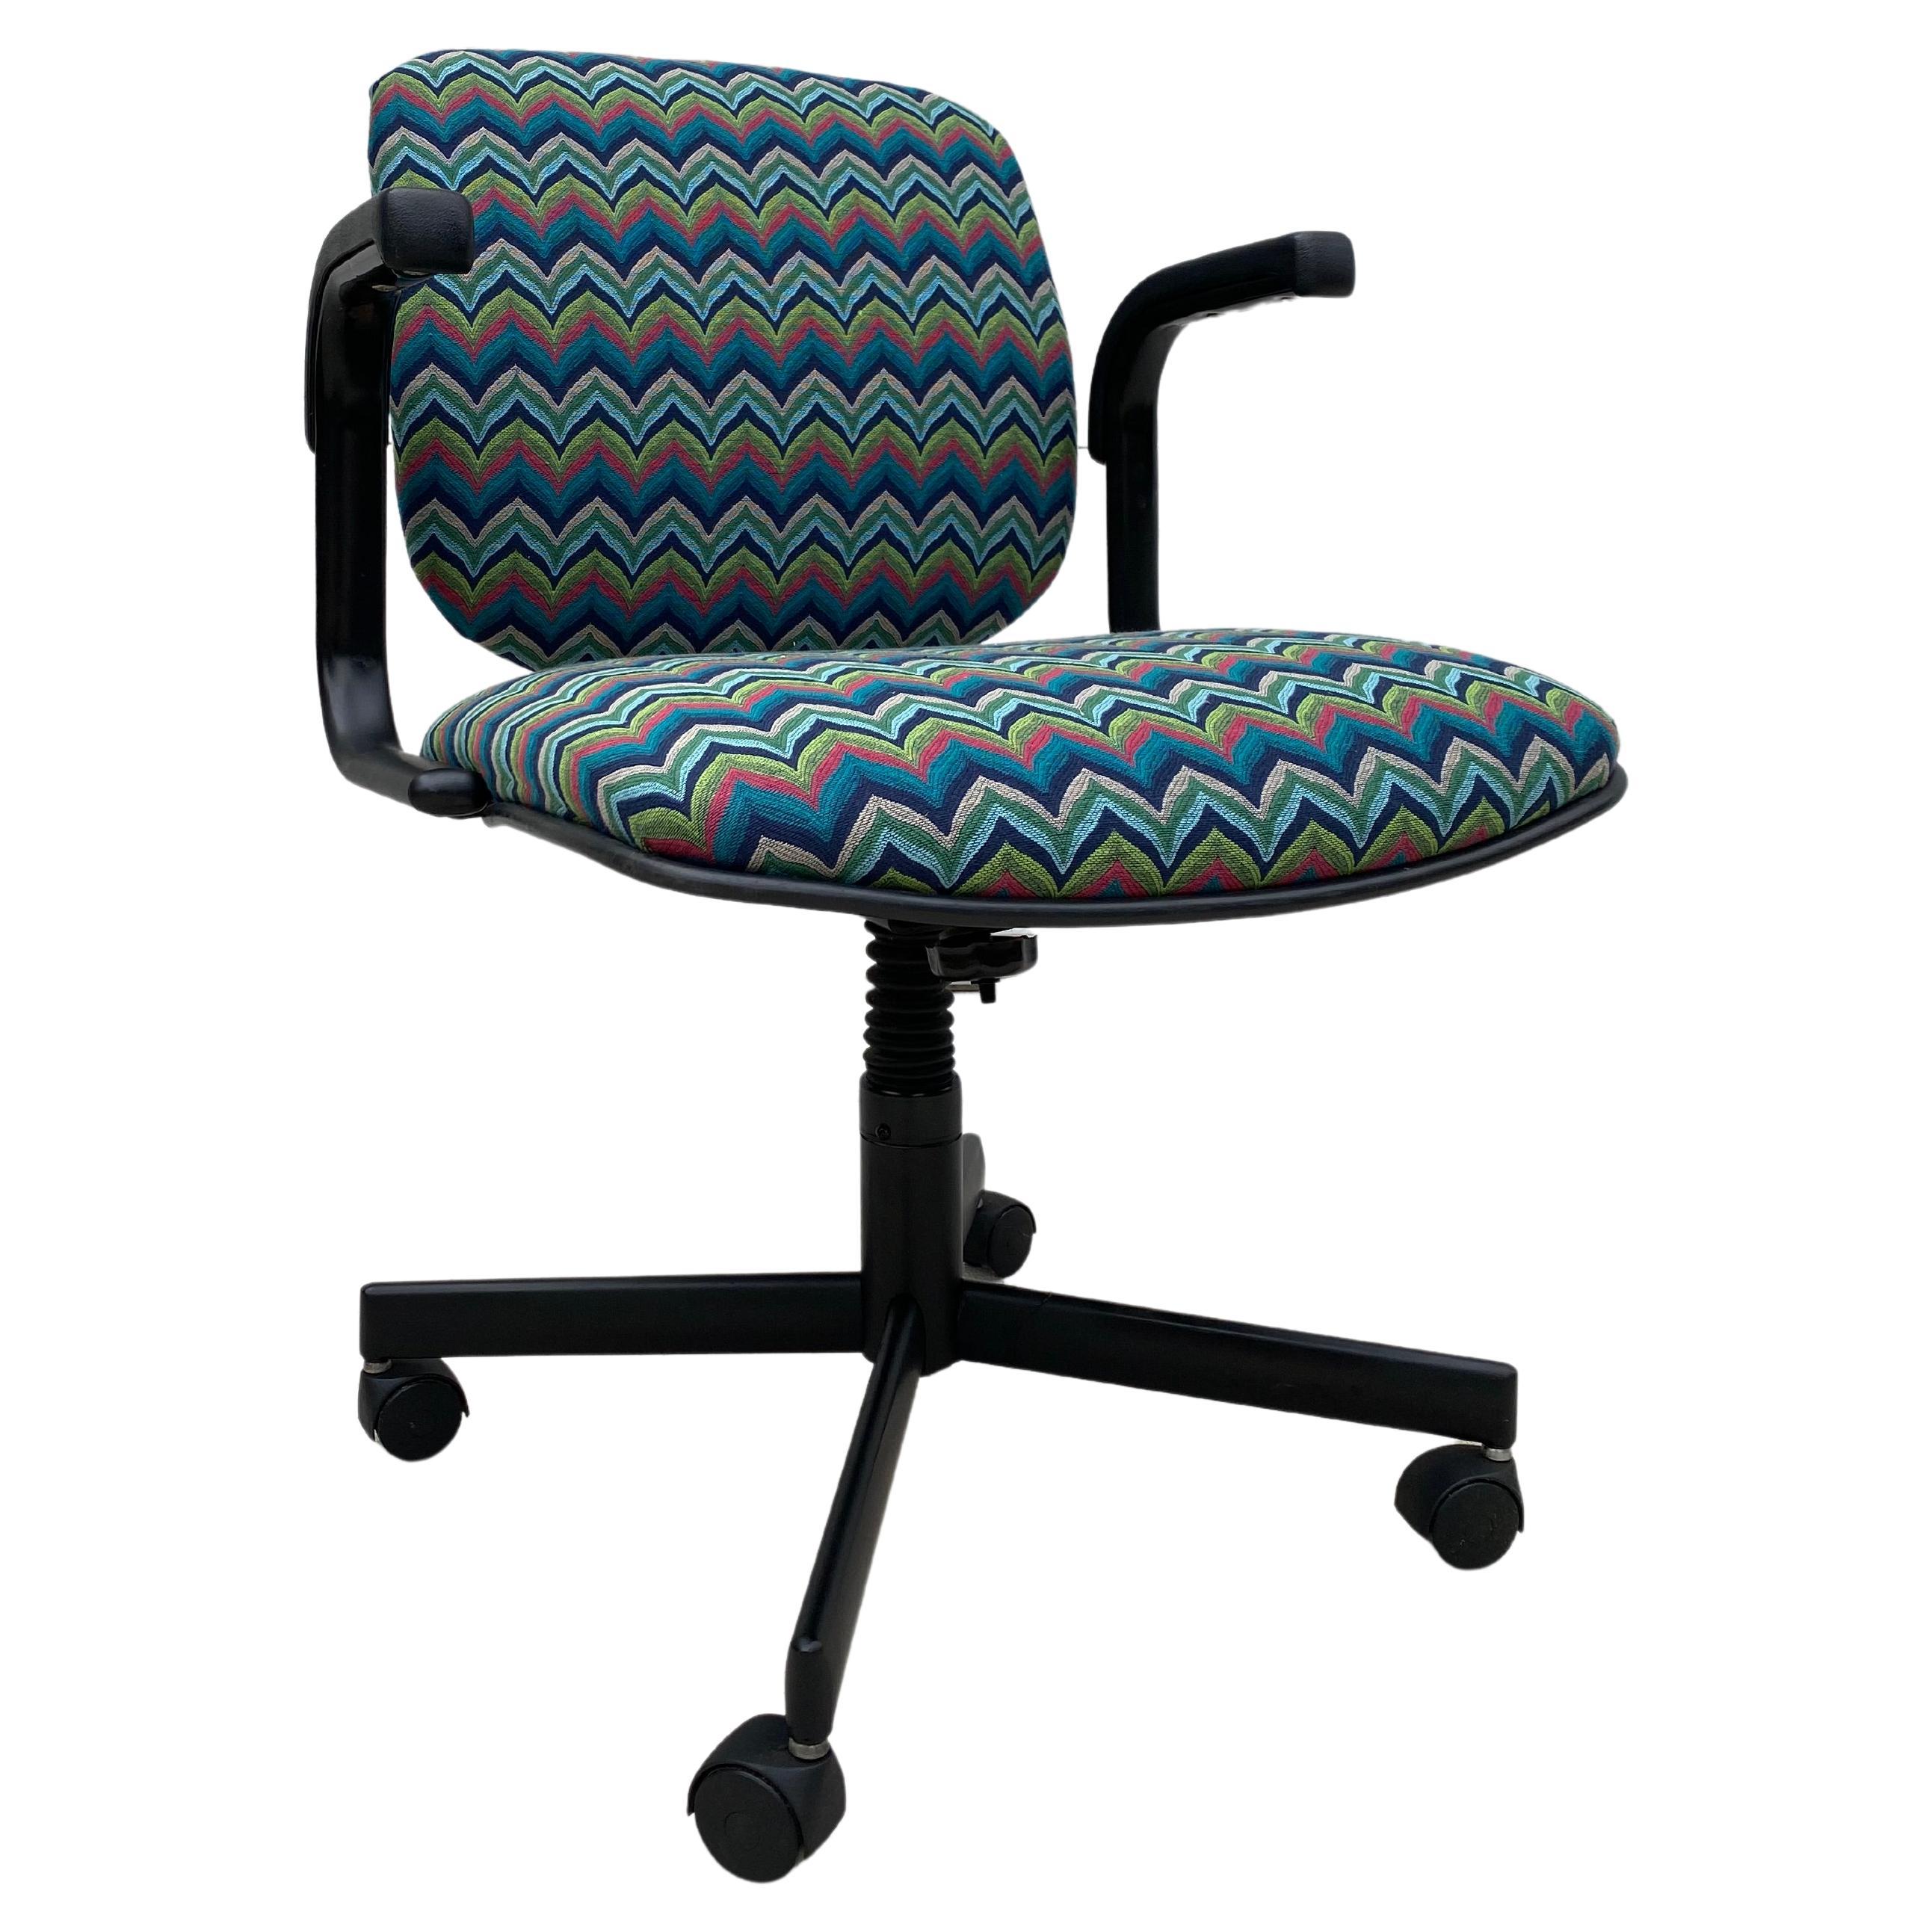 1980s Reupholstered Office Chair by Stylex, Inc. In Mid-Century Modern Fabric For Sale